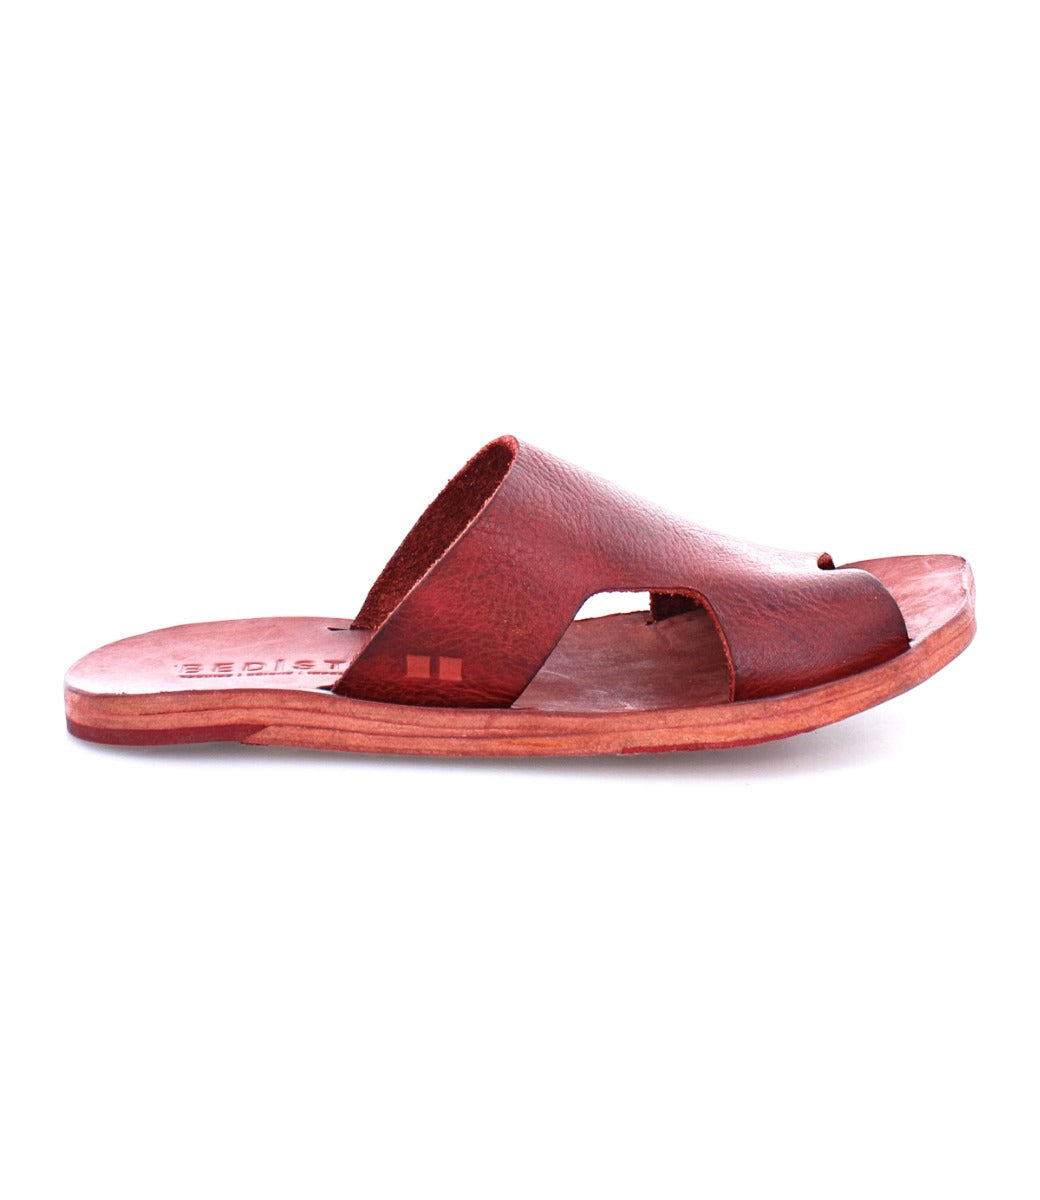 A Bed Stu Karine red leather sandal on a white background.